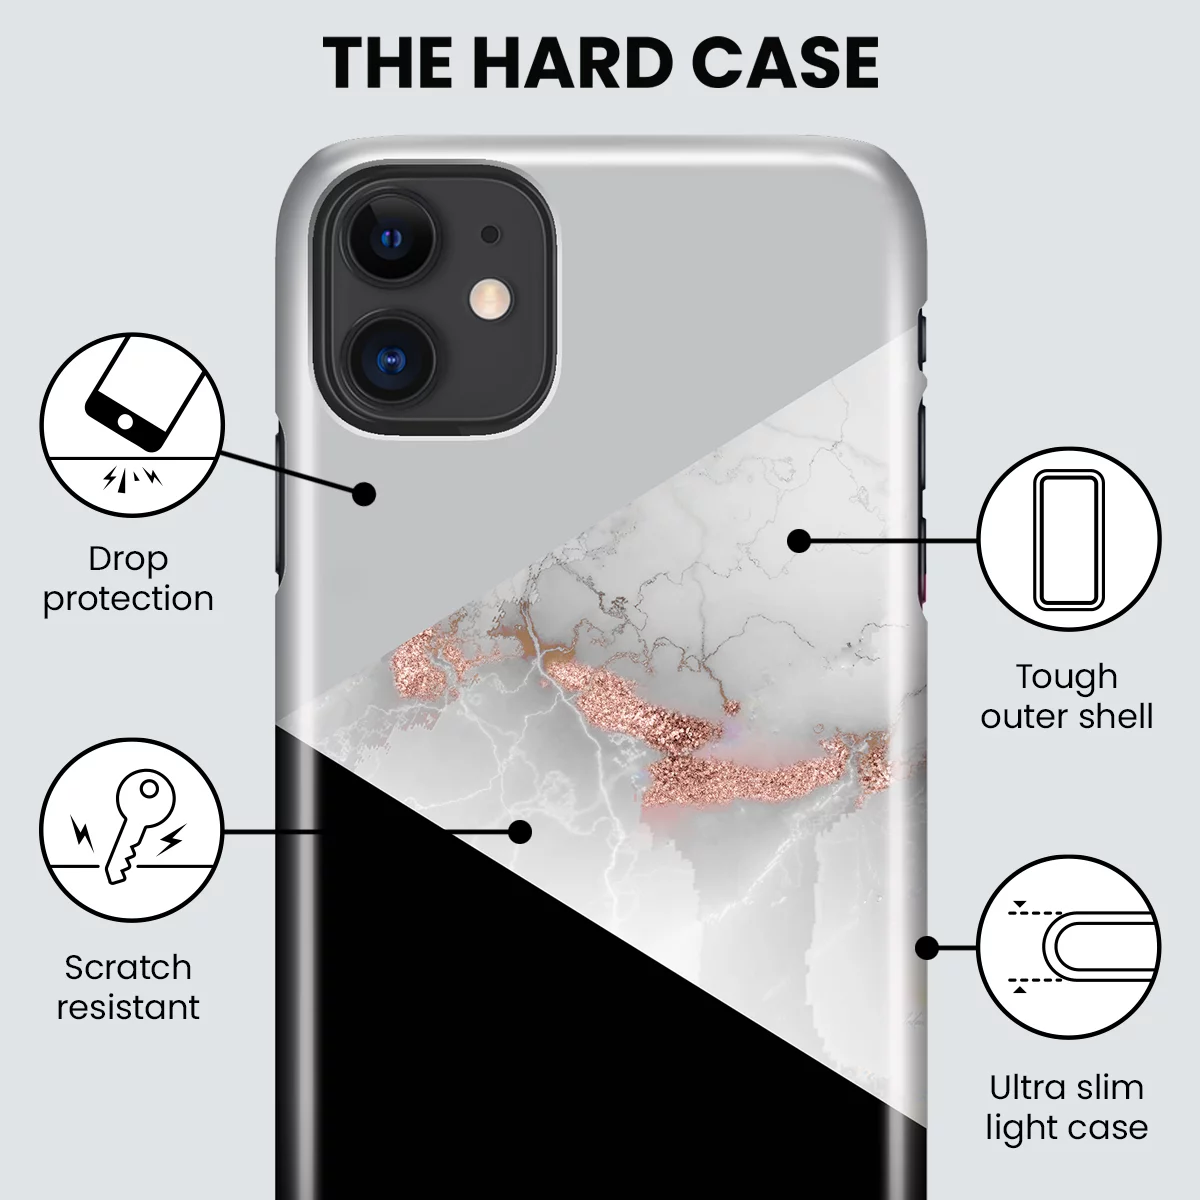 So what is a hard case?